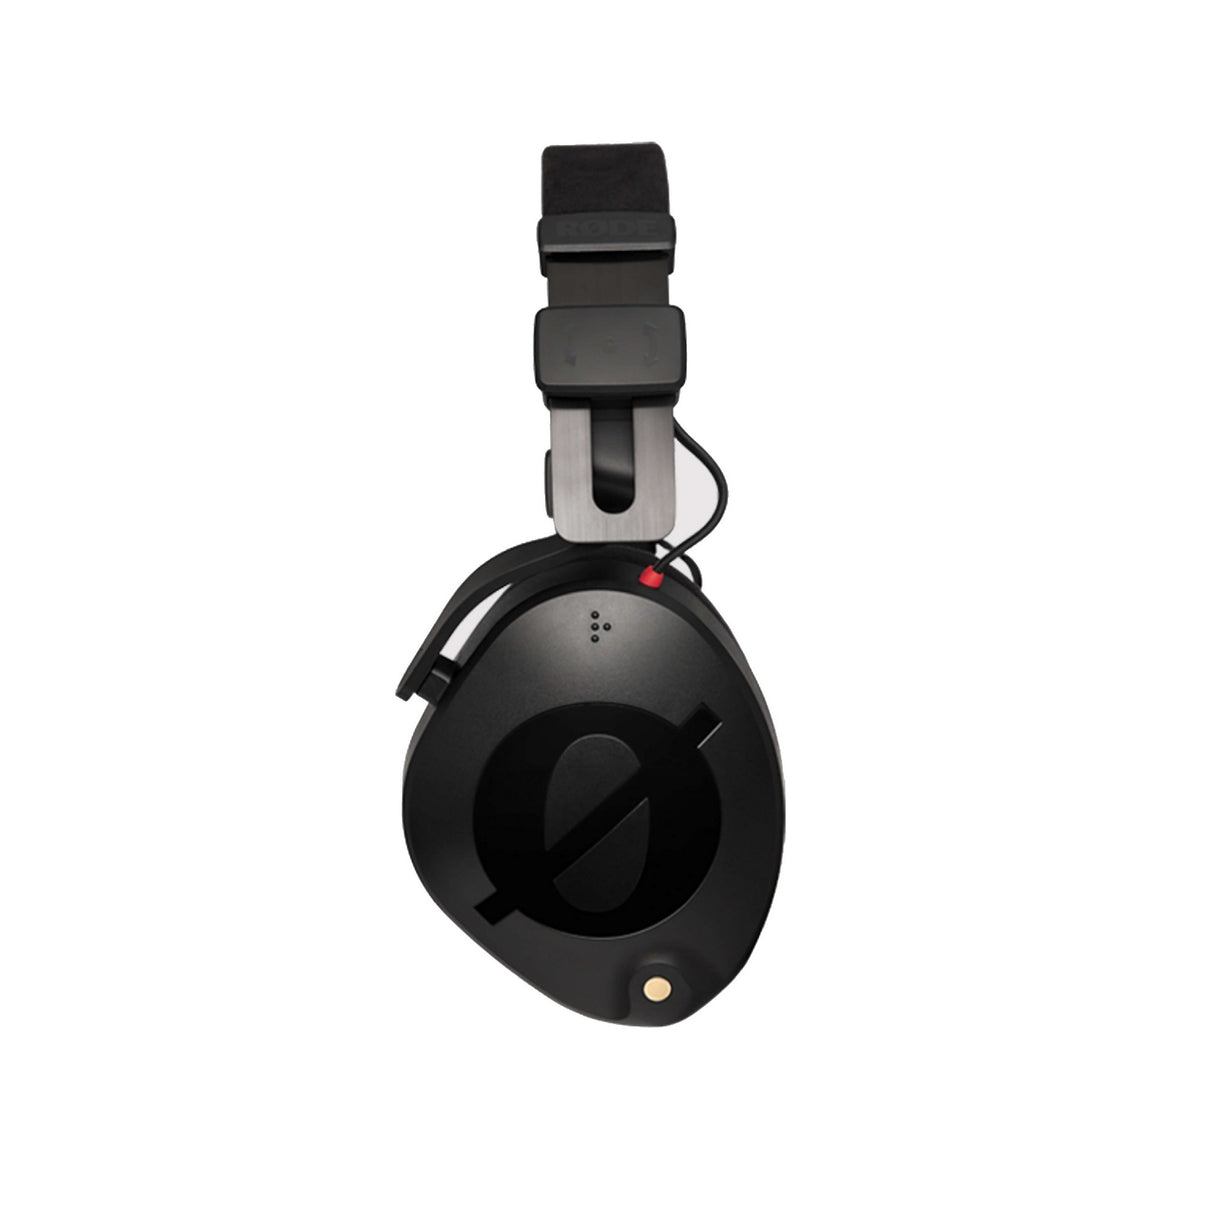 RODE NTH-100M Professional Over-Ear Headset with Microphone